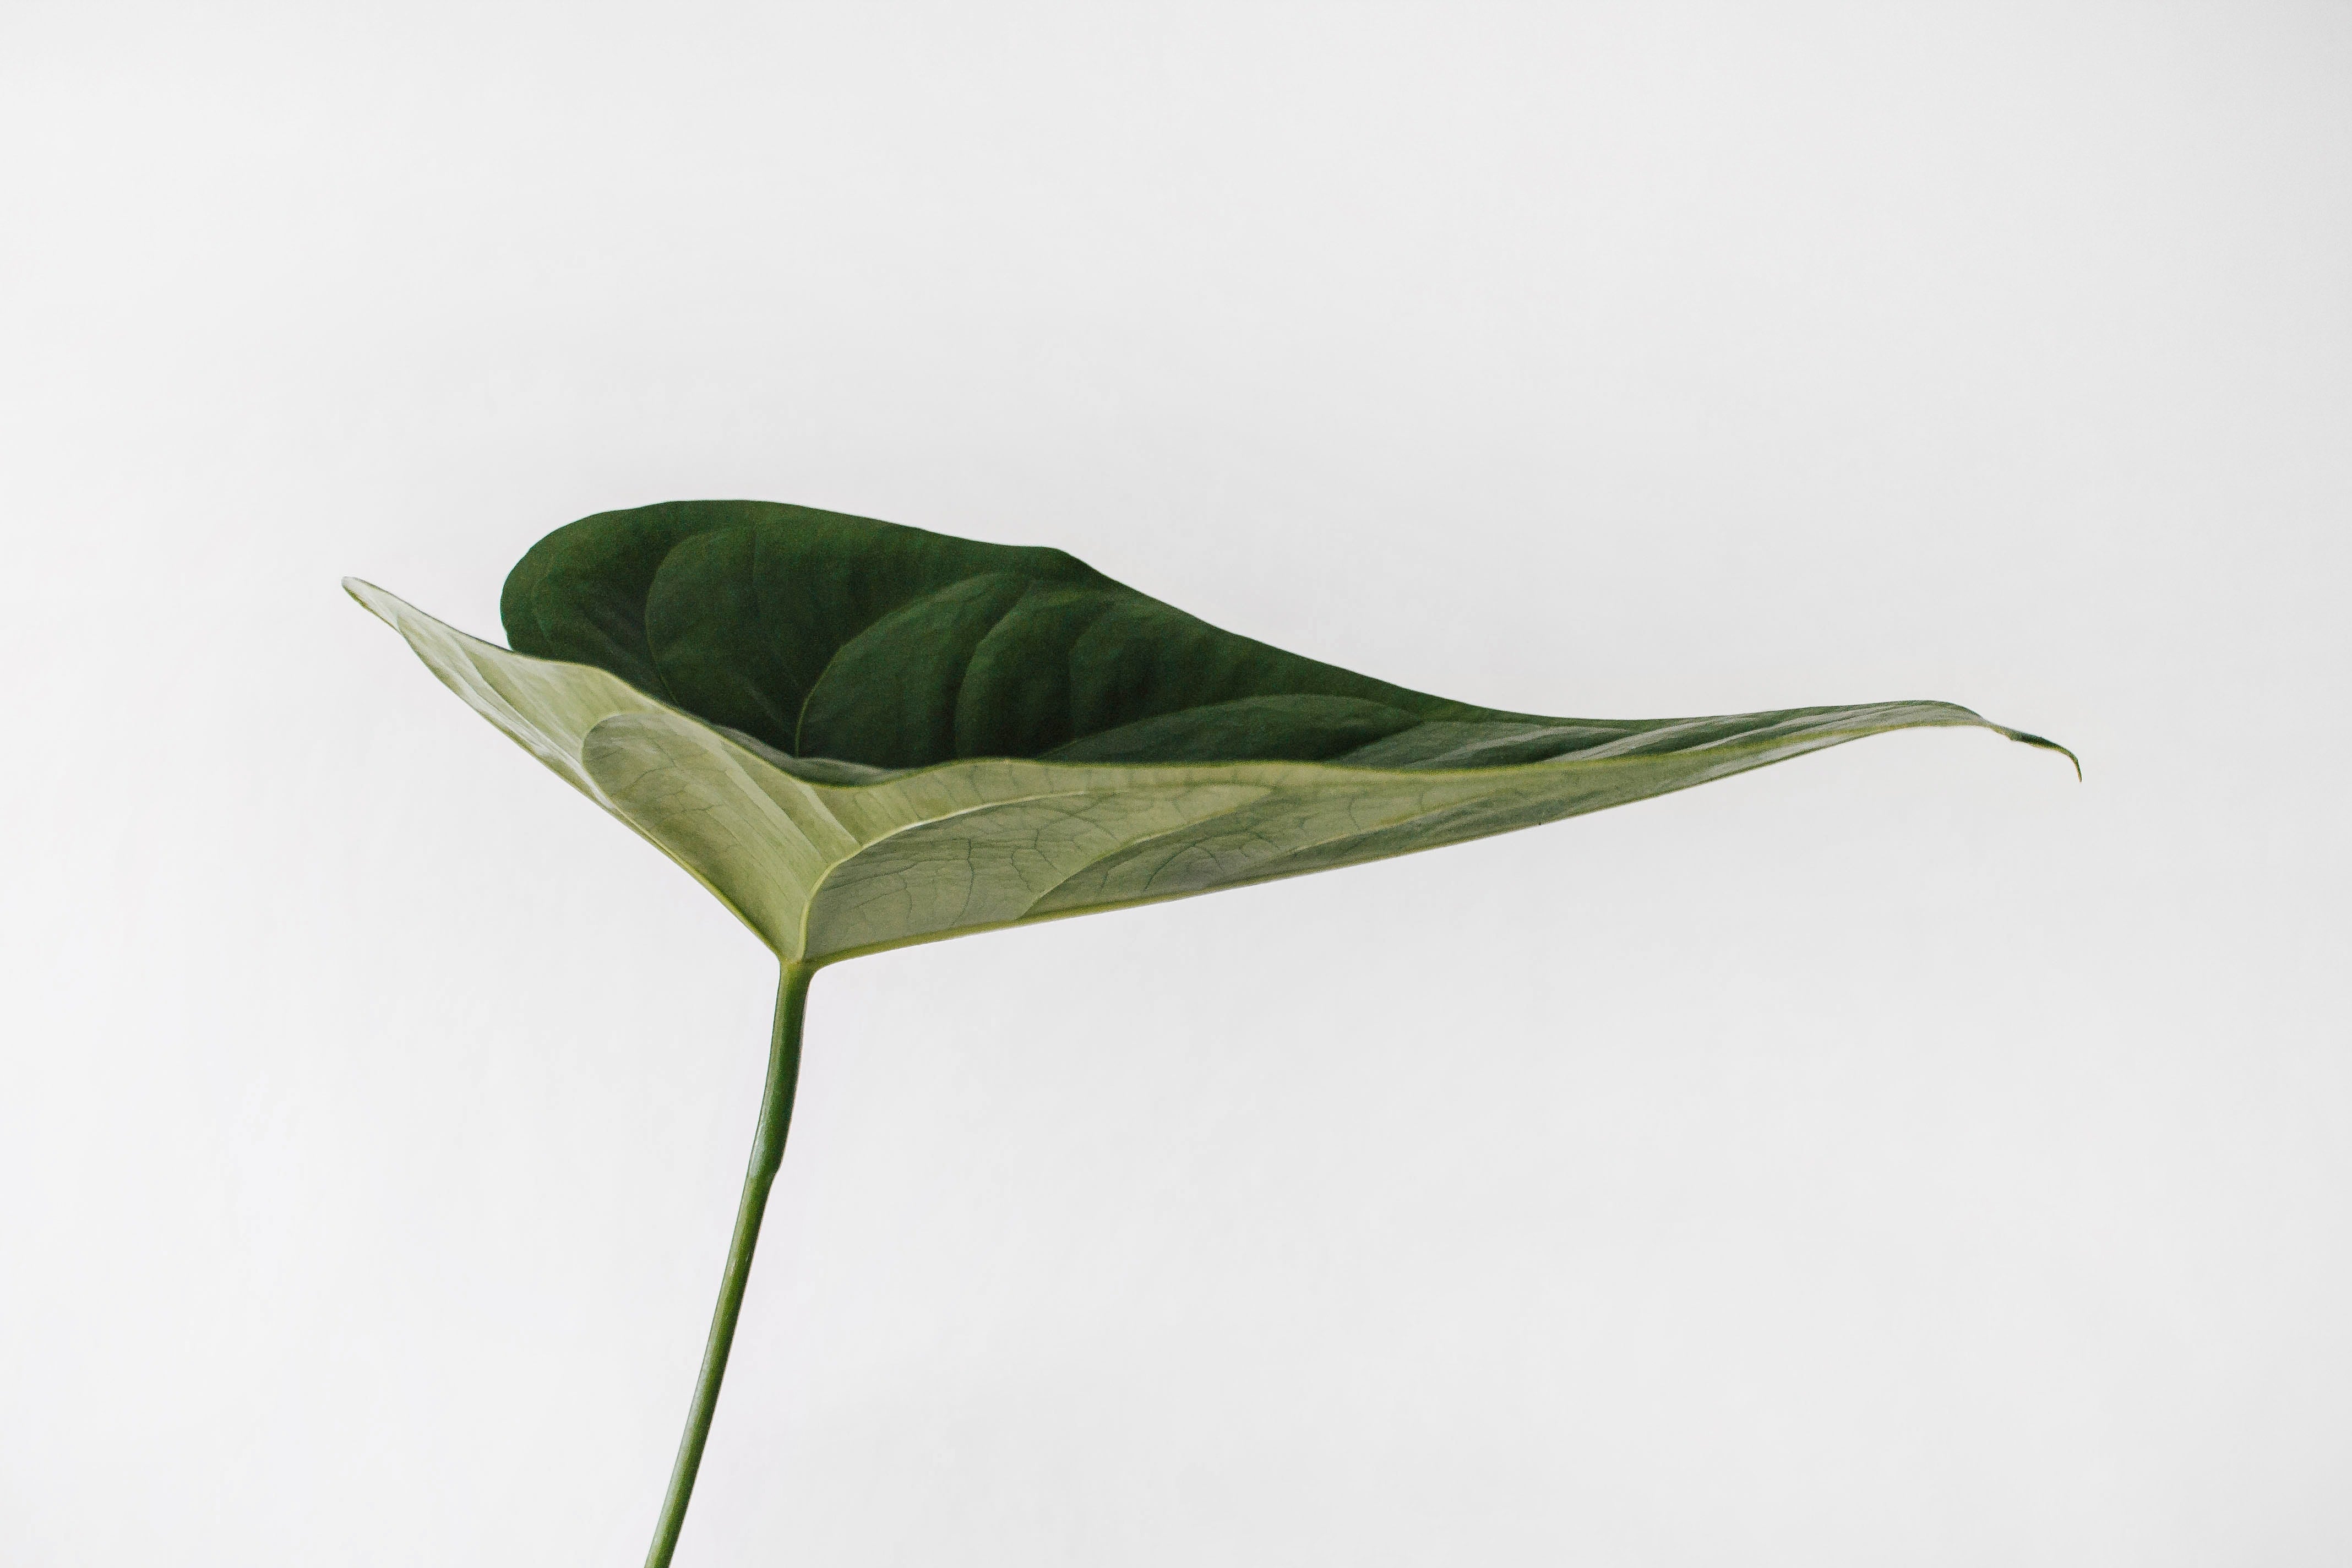 A green leaf in front of a white background.